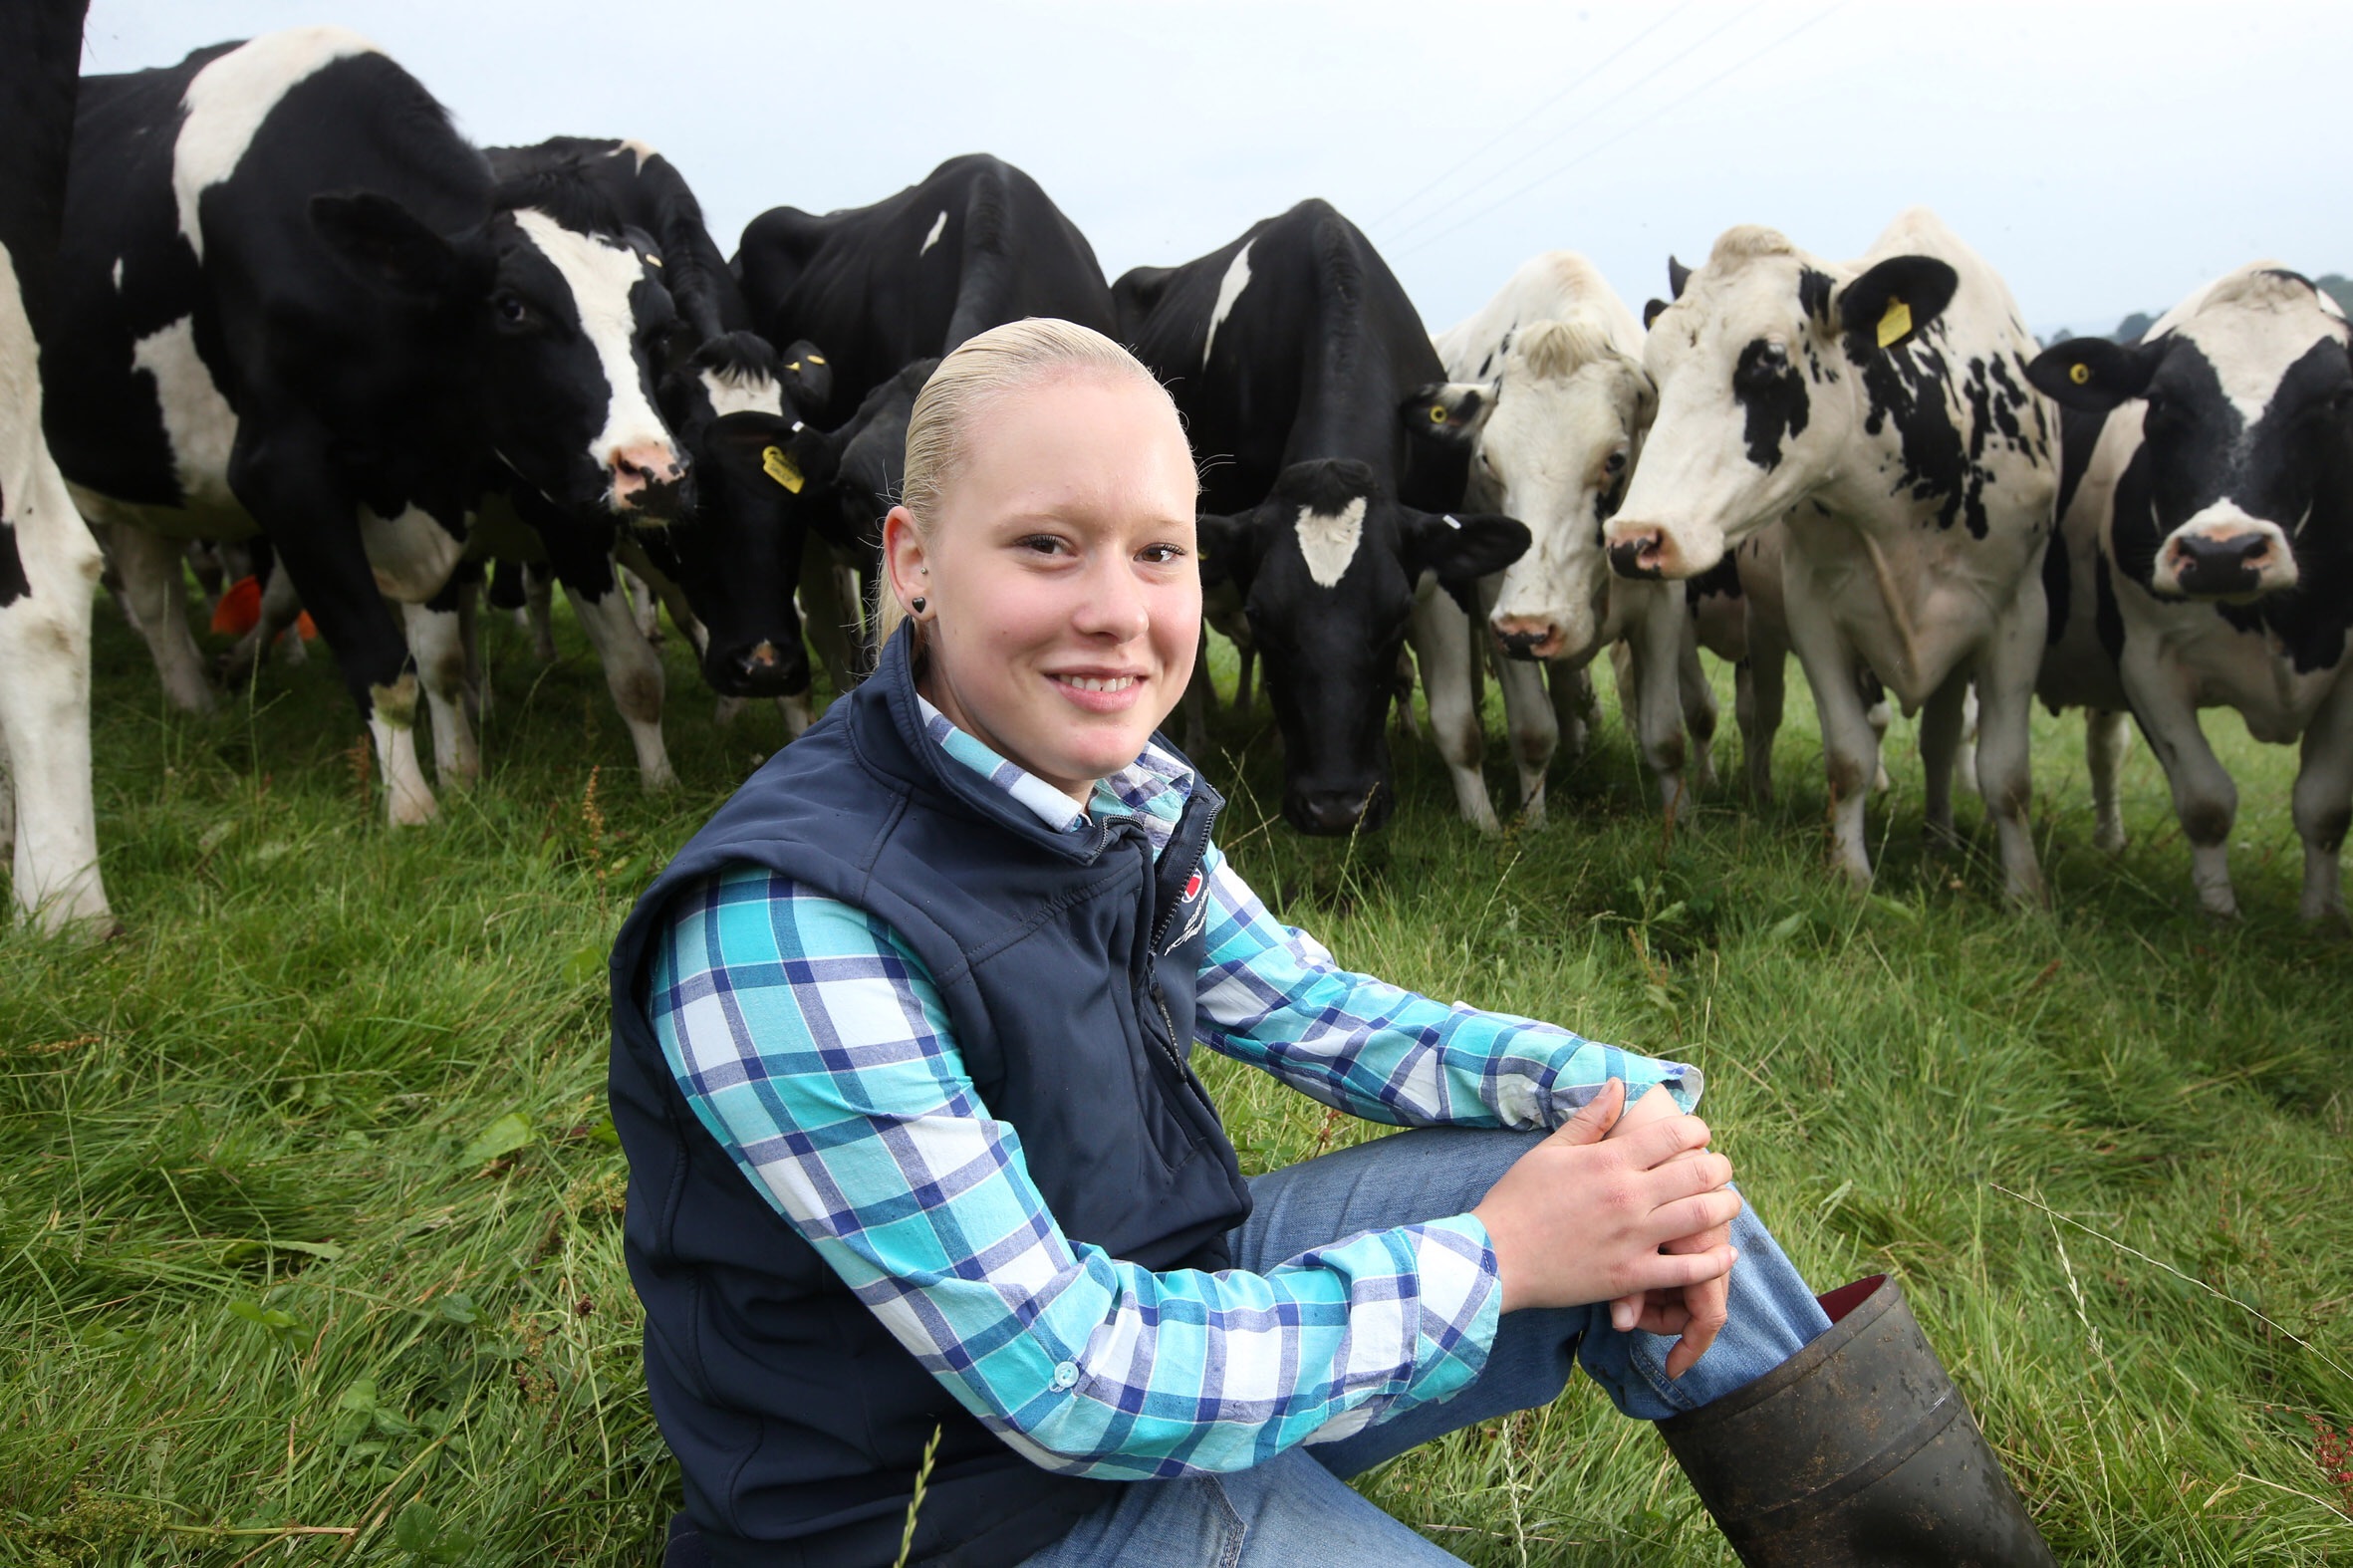 Megan Wilkins developing a career in the male dominated farming industry